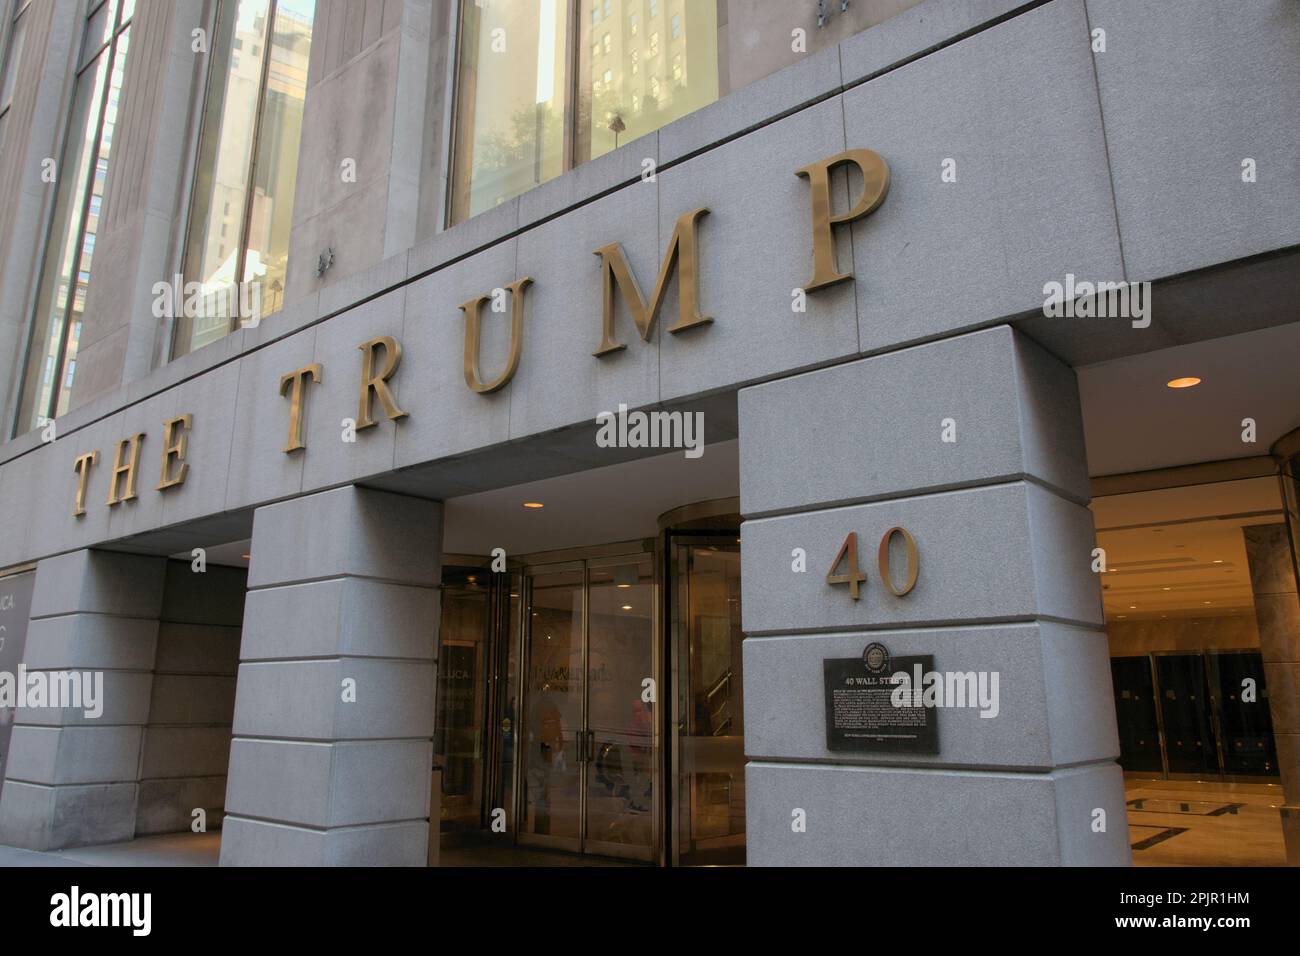 The Trump building at 40 Wall Street, New York Stock Photo